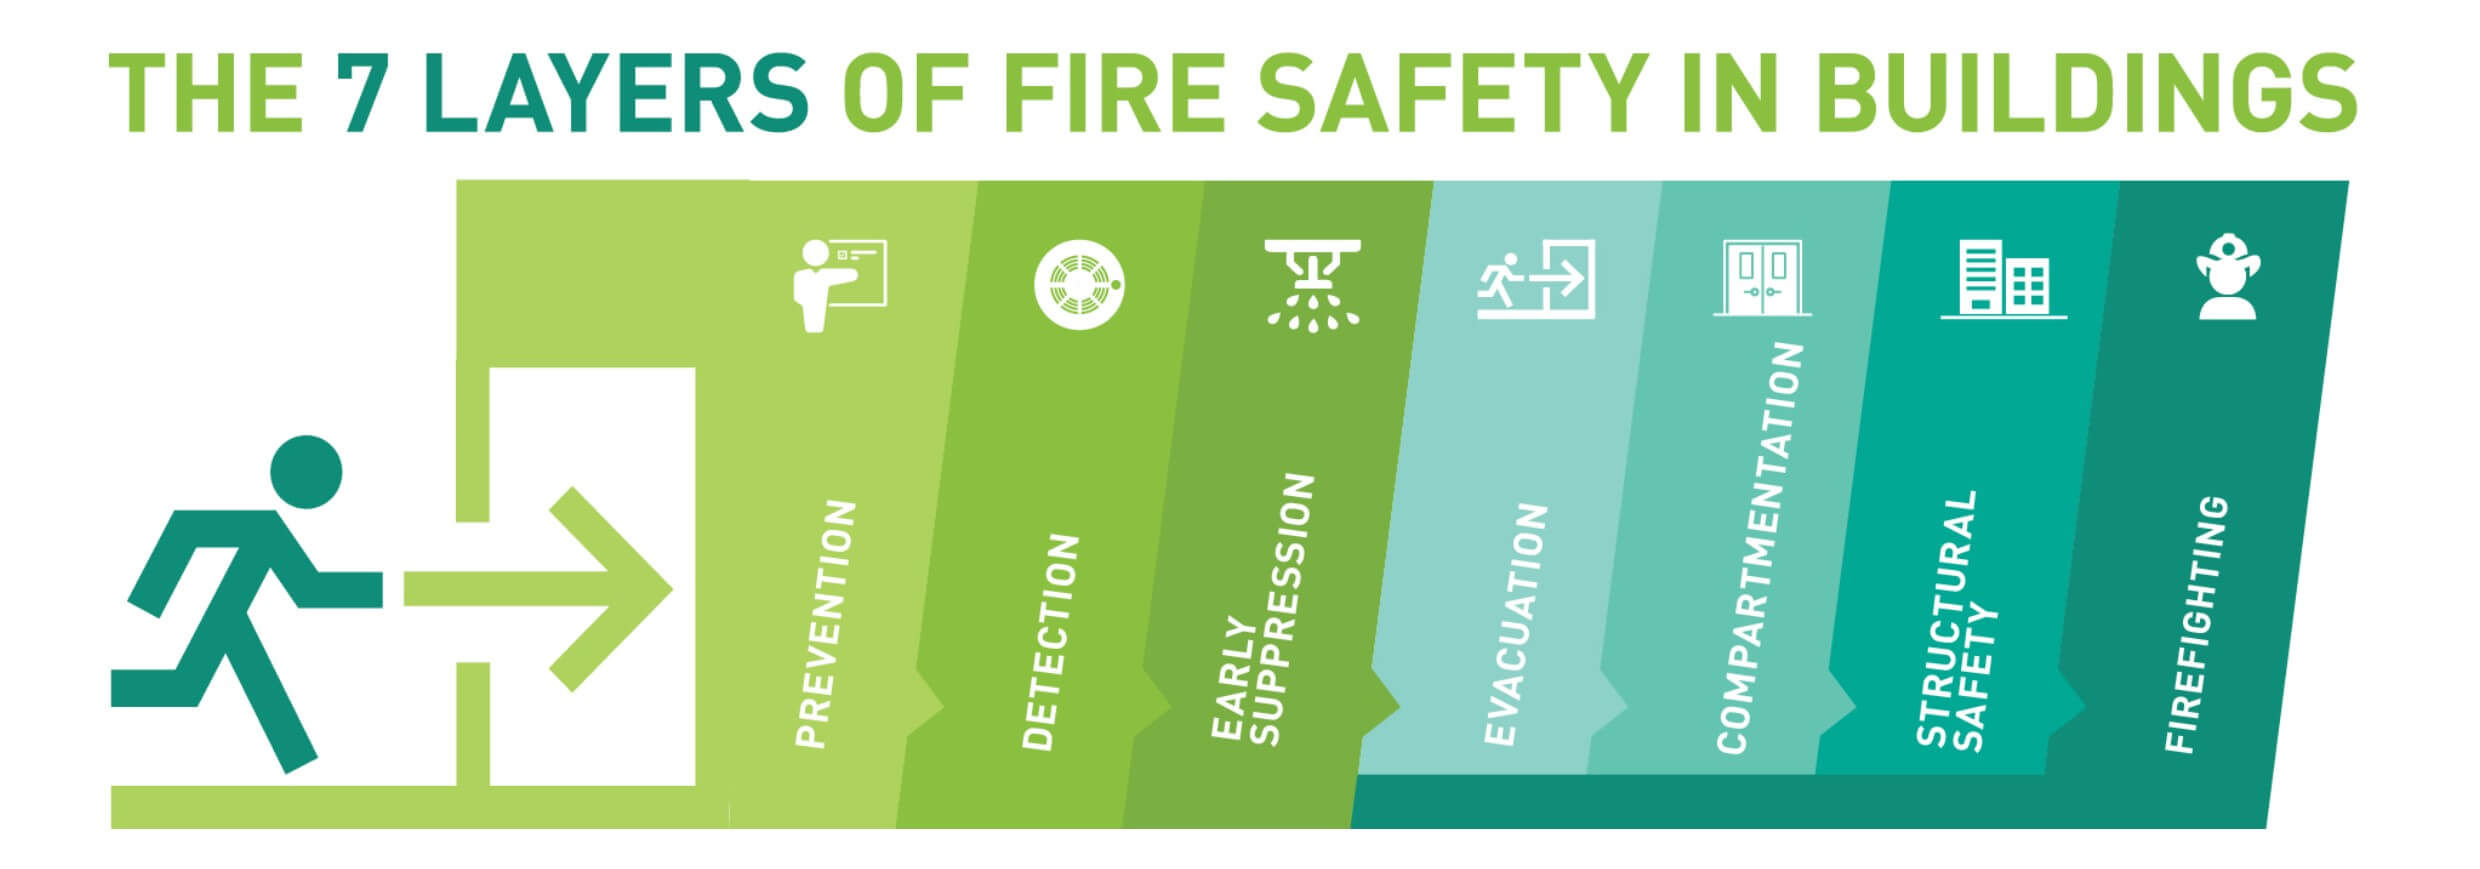 The 7 layers for fire safety in Buildings